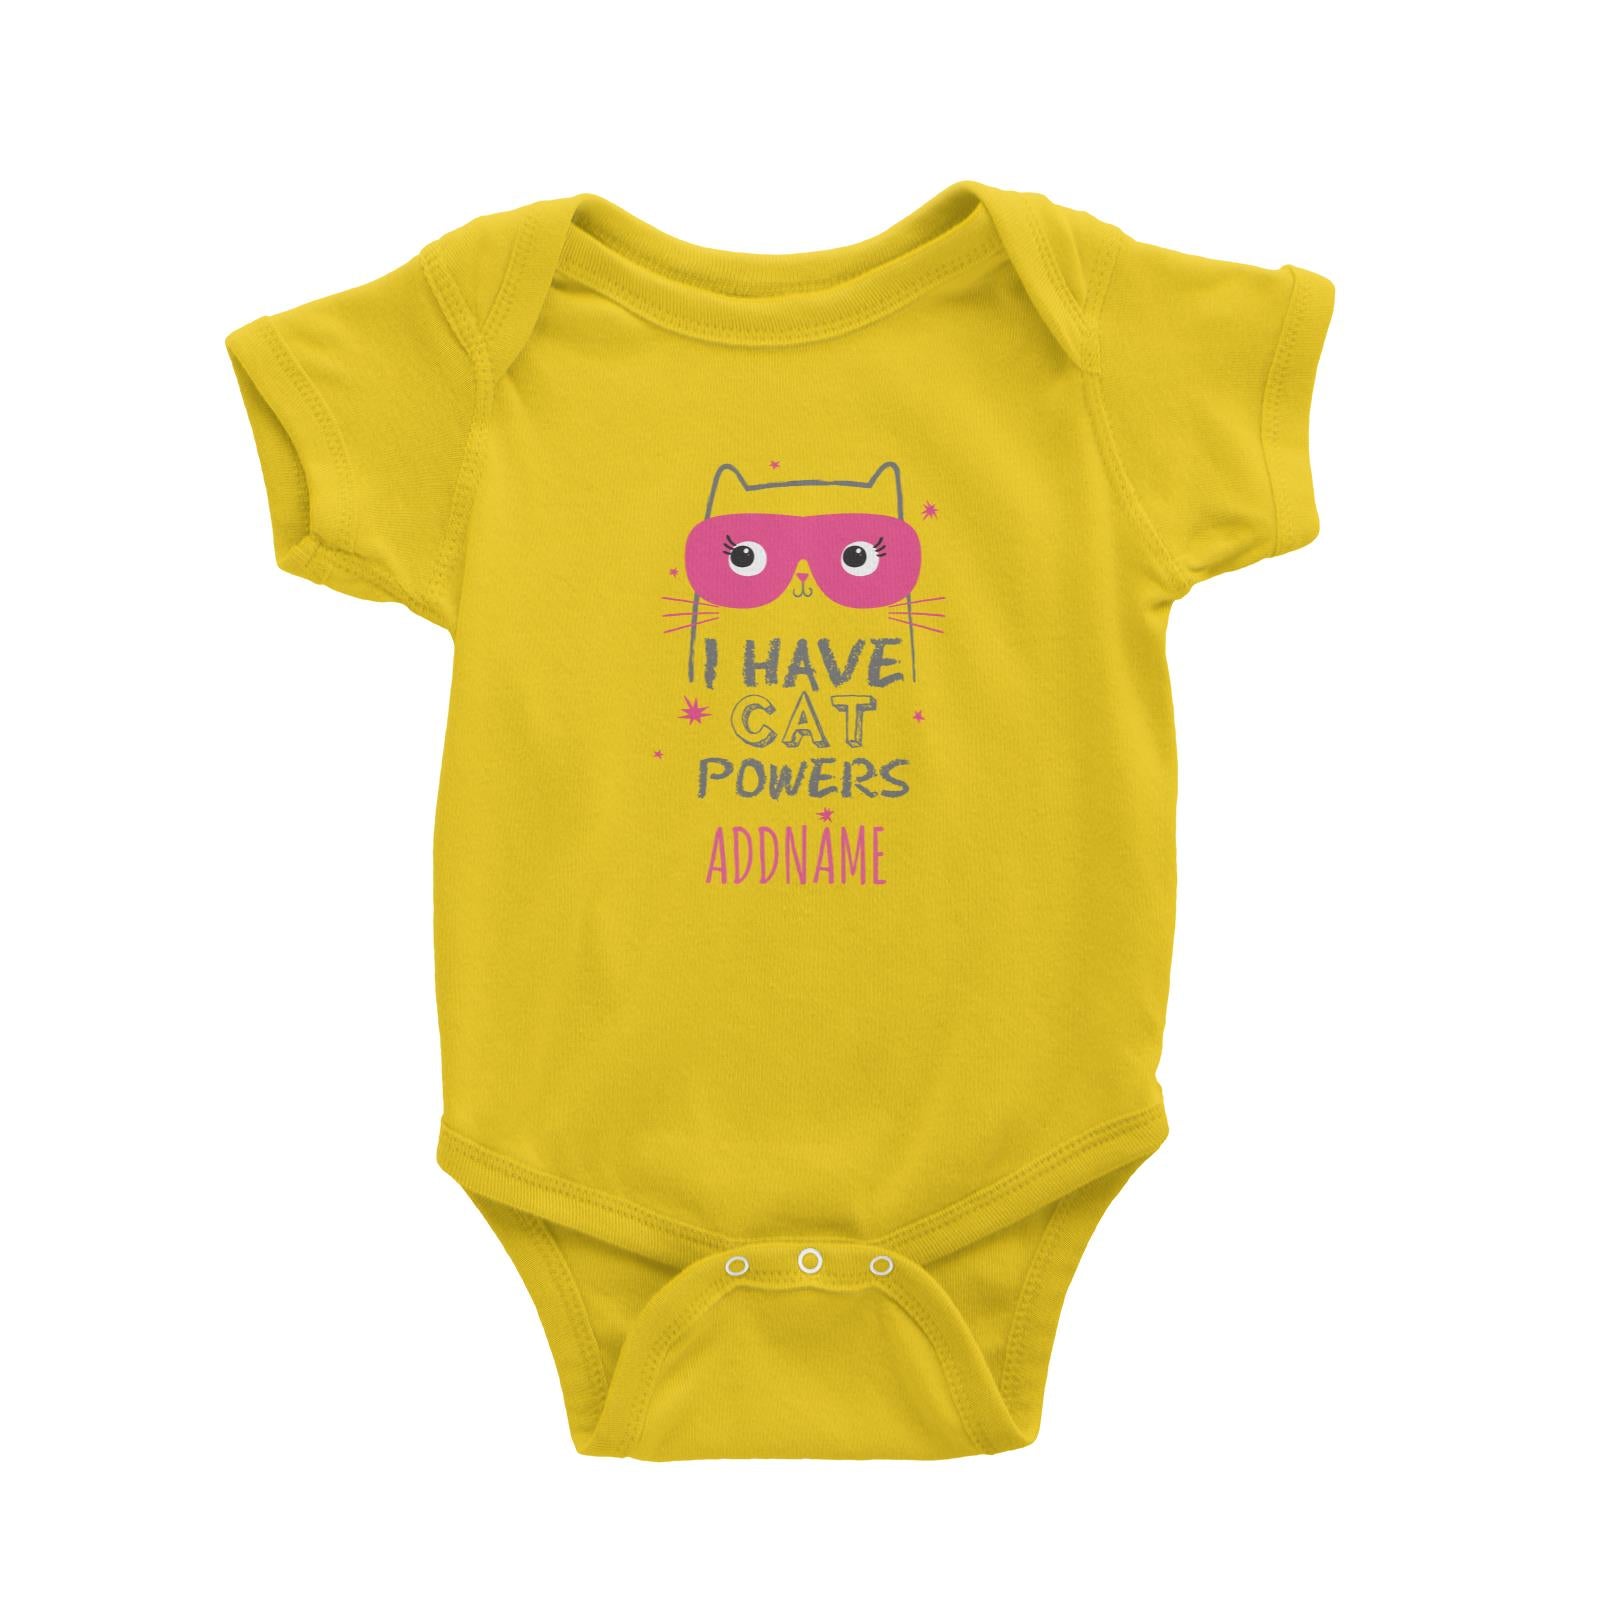 I Have Cat Powers Addname Baby Romper